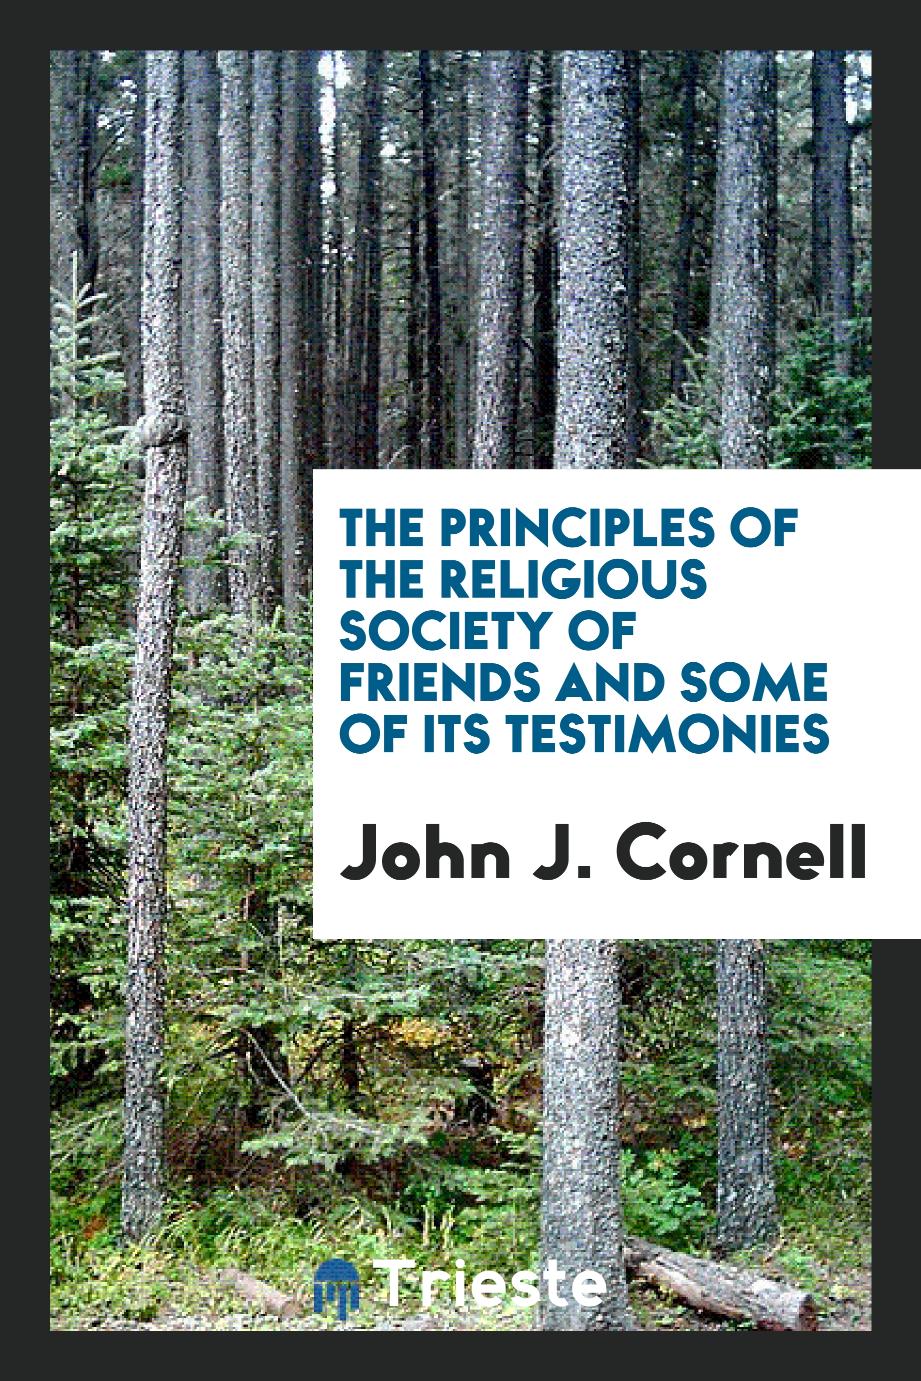 John J. Cornell - The Principles of the Religious Society of Friends and Some of Its Testimonies